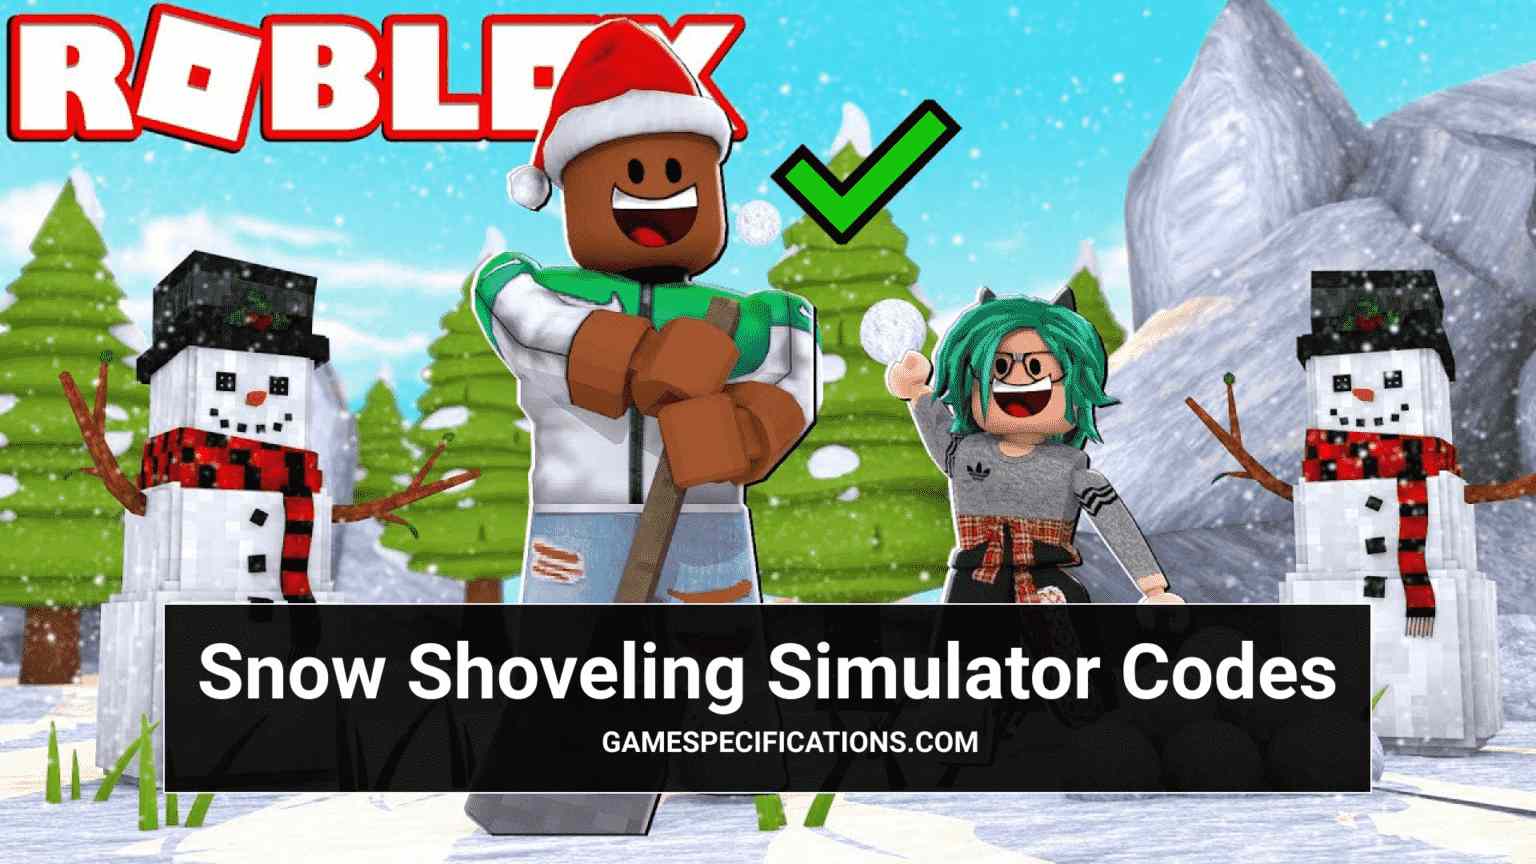 roblox-snow-shoveling-simulator-codes-july-2022-game-specifications